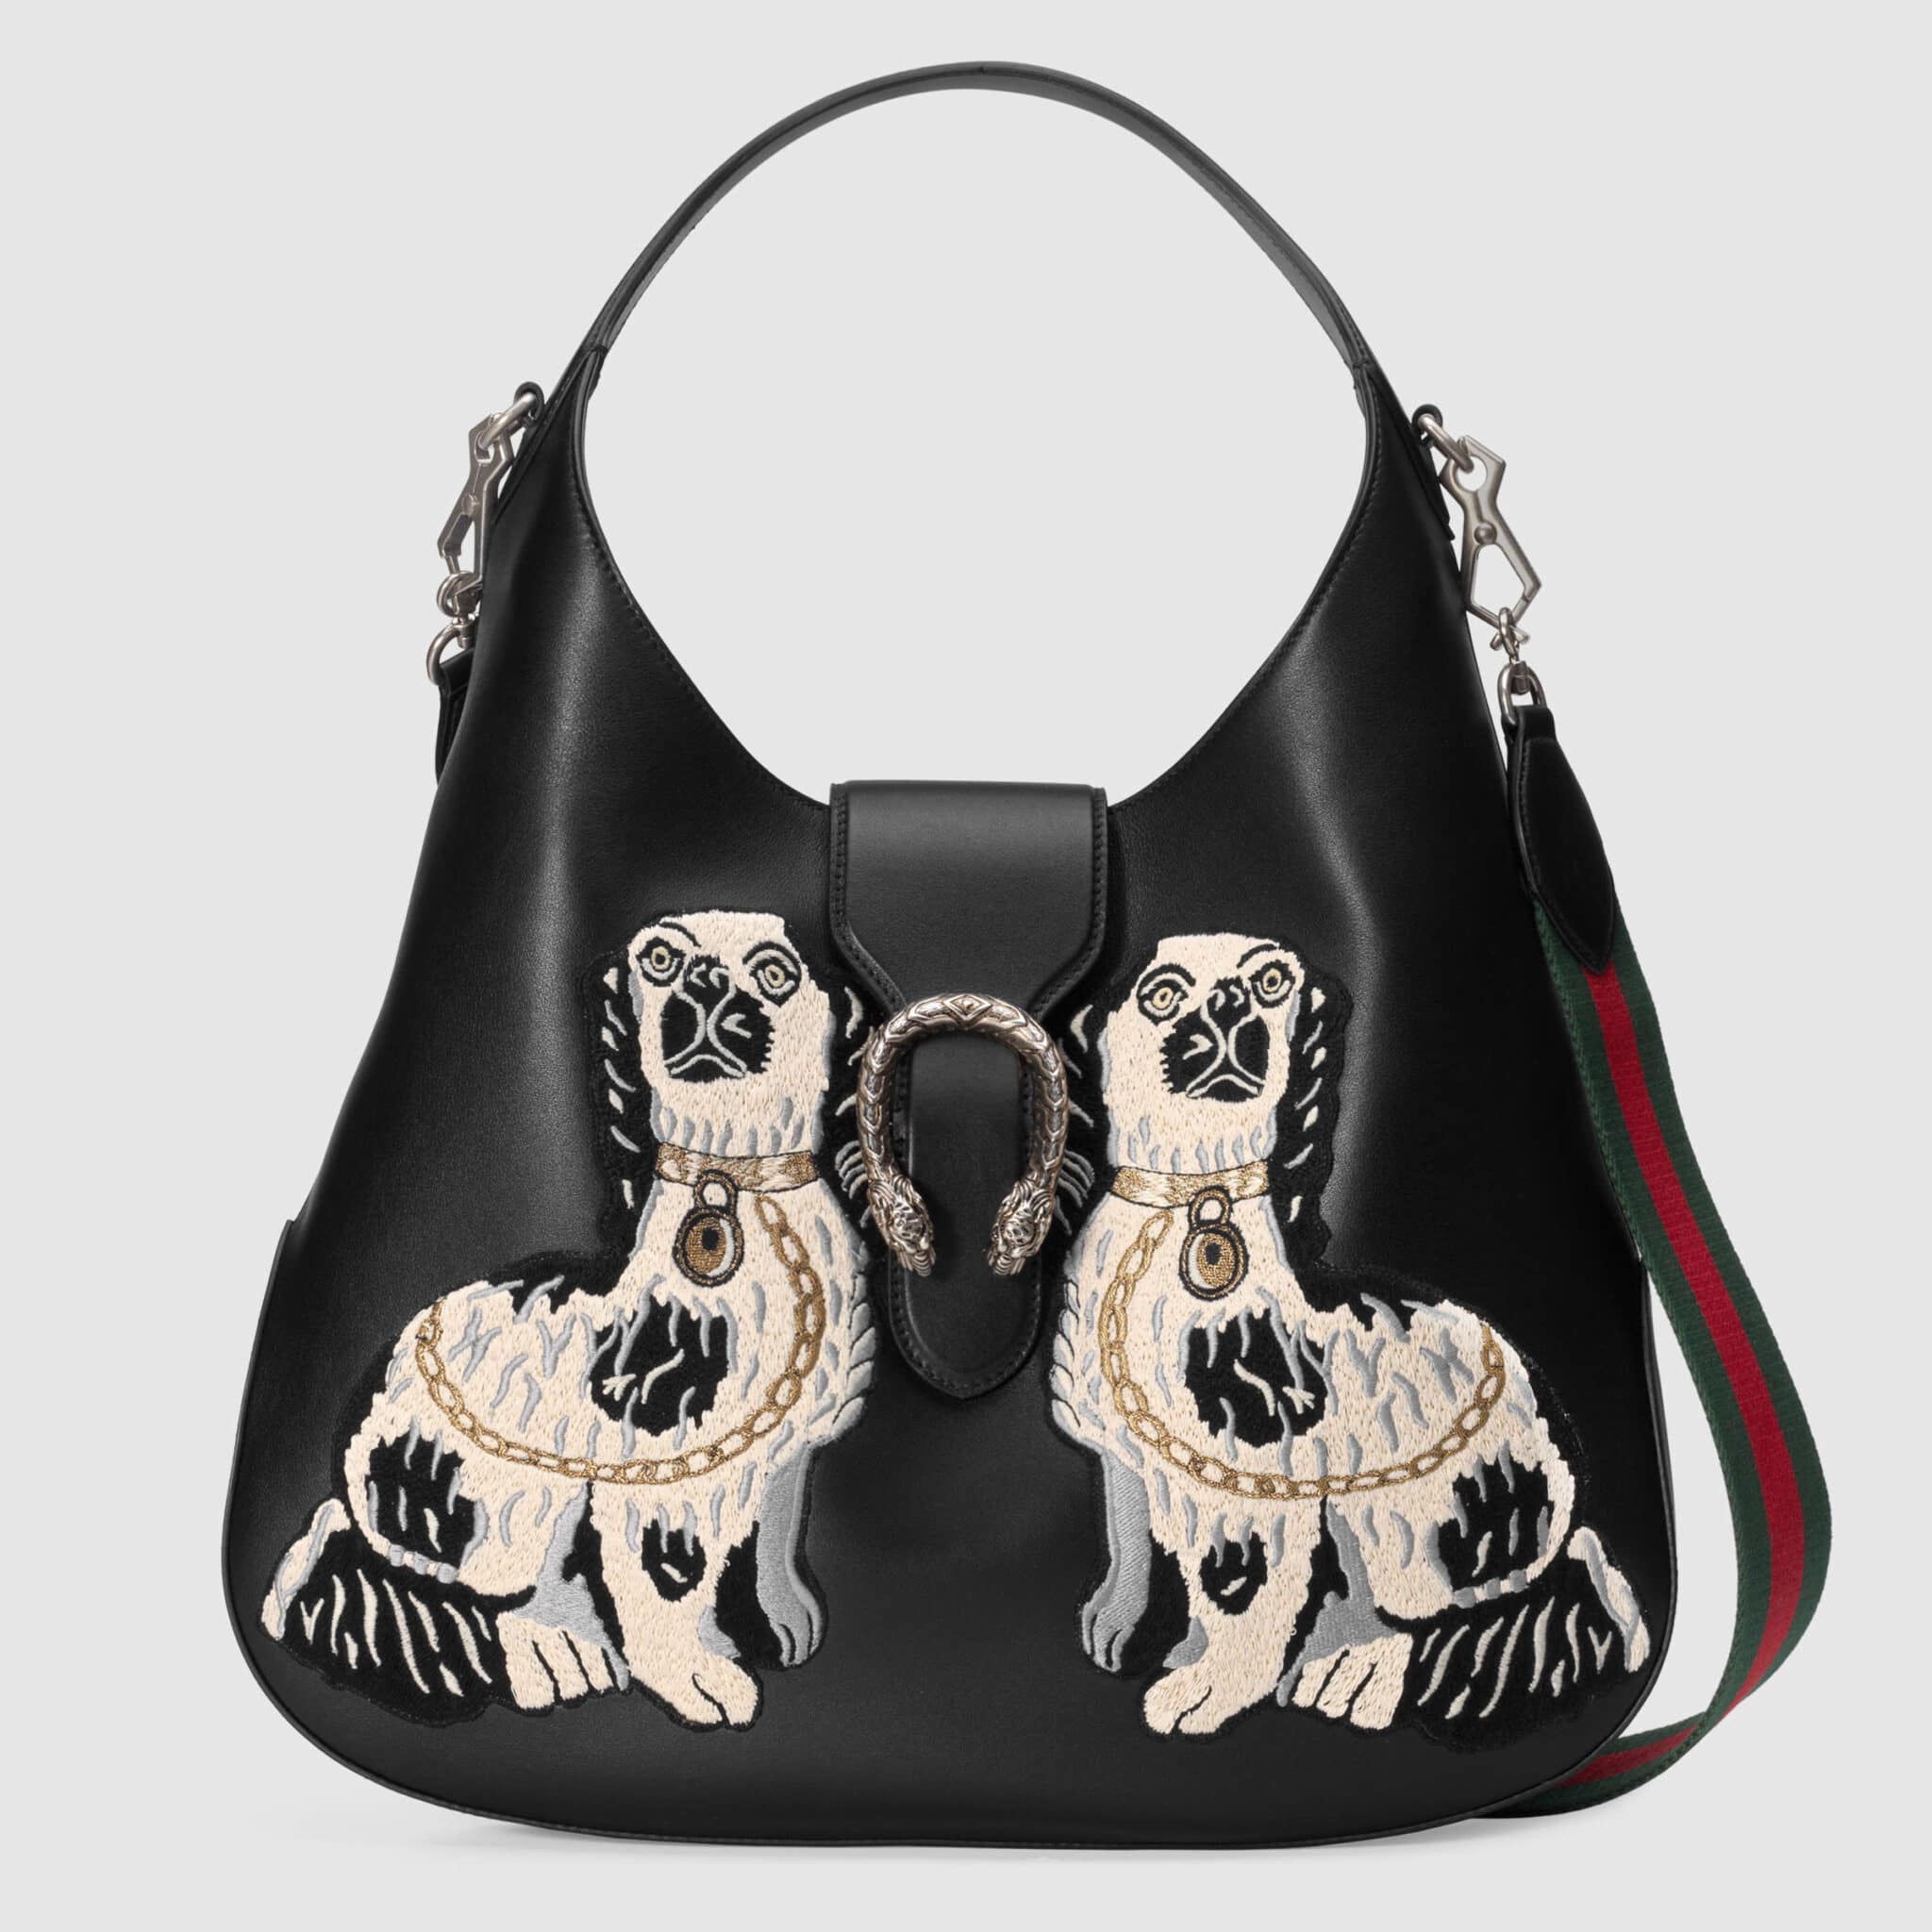 gucci bag with dog design